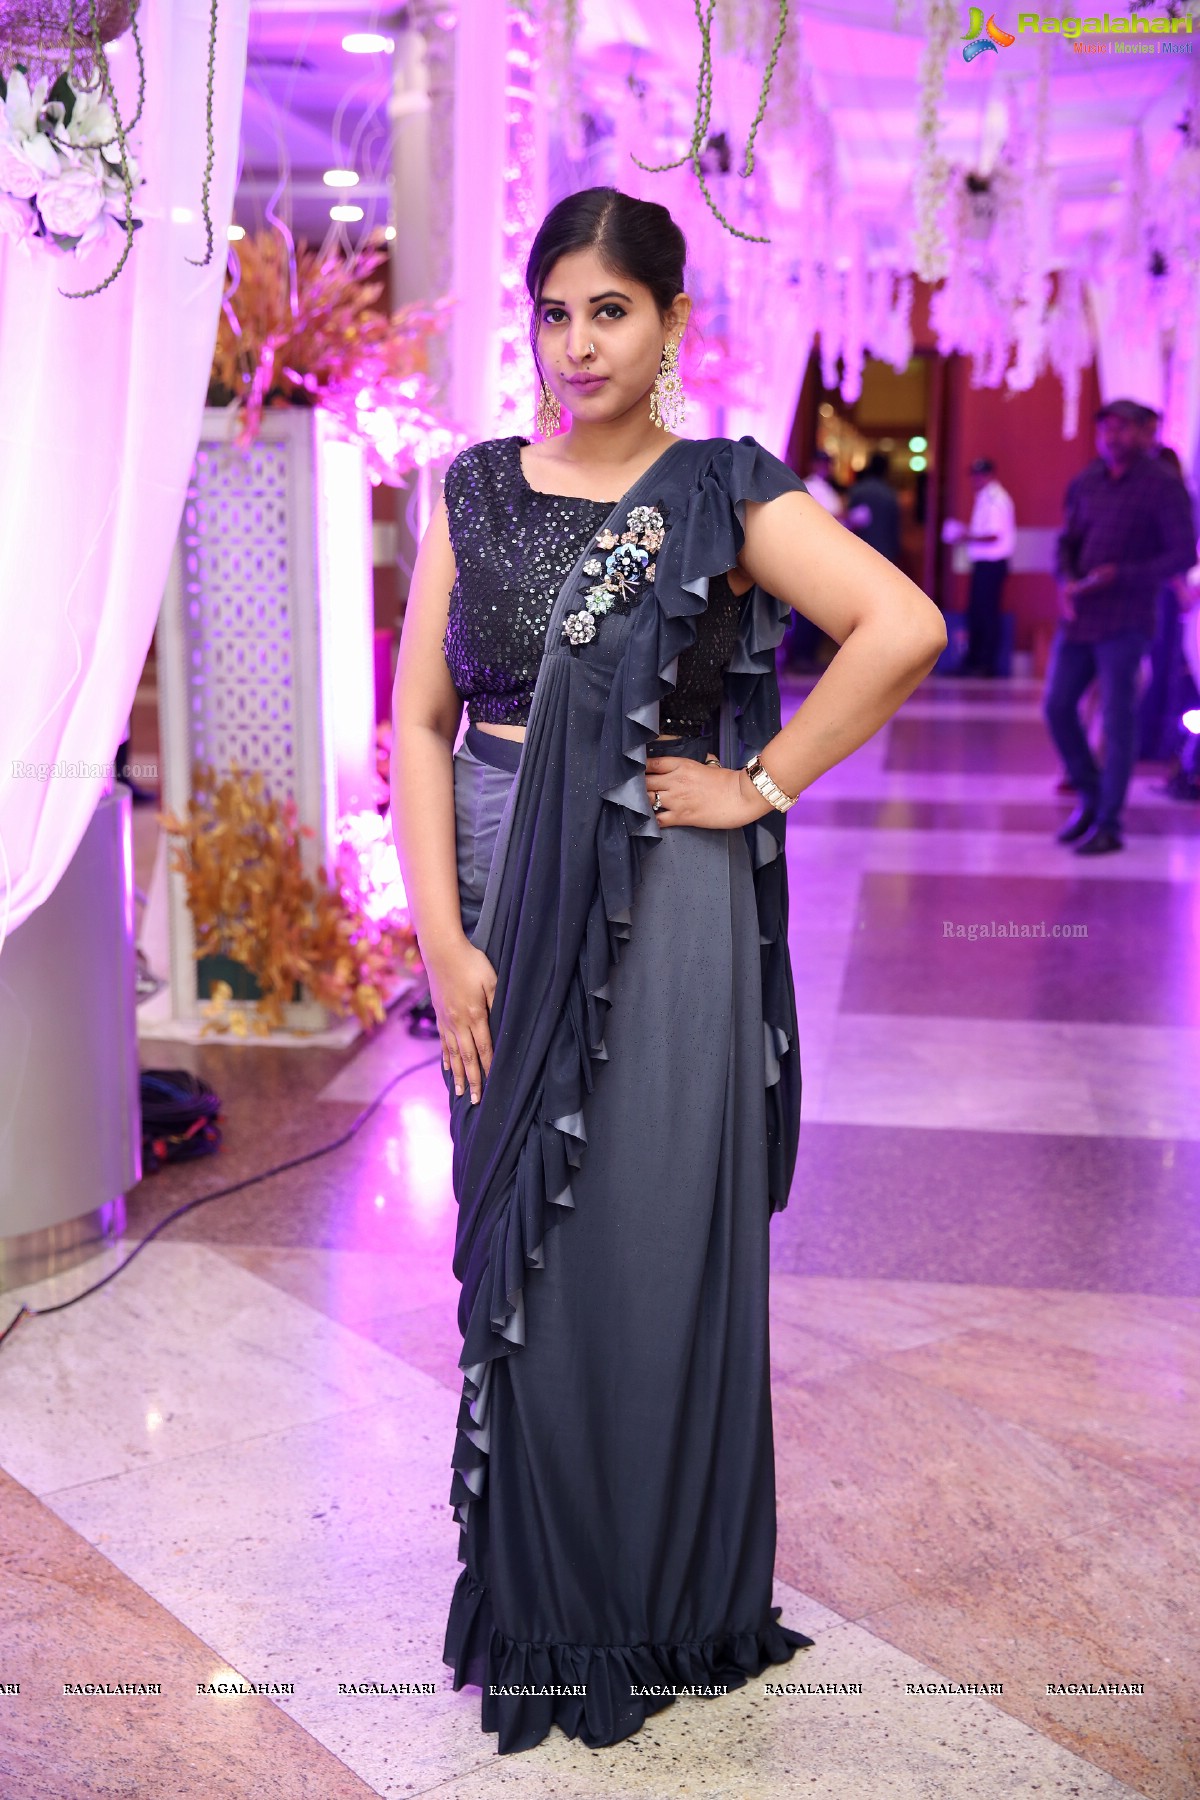 Design Library Grand Launch at HICC (Novotel), Hyderabad